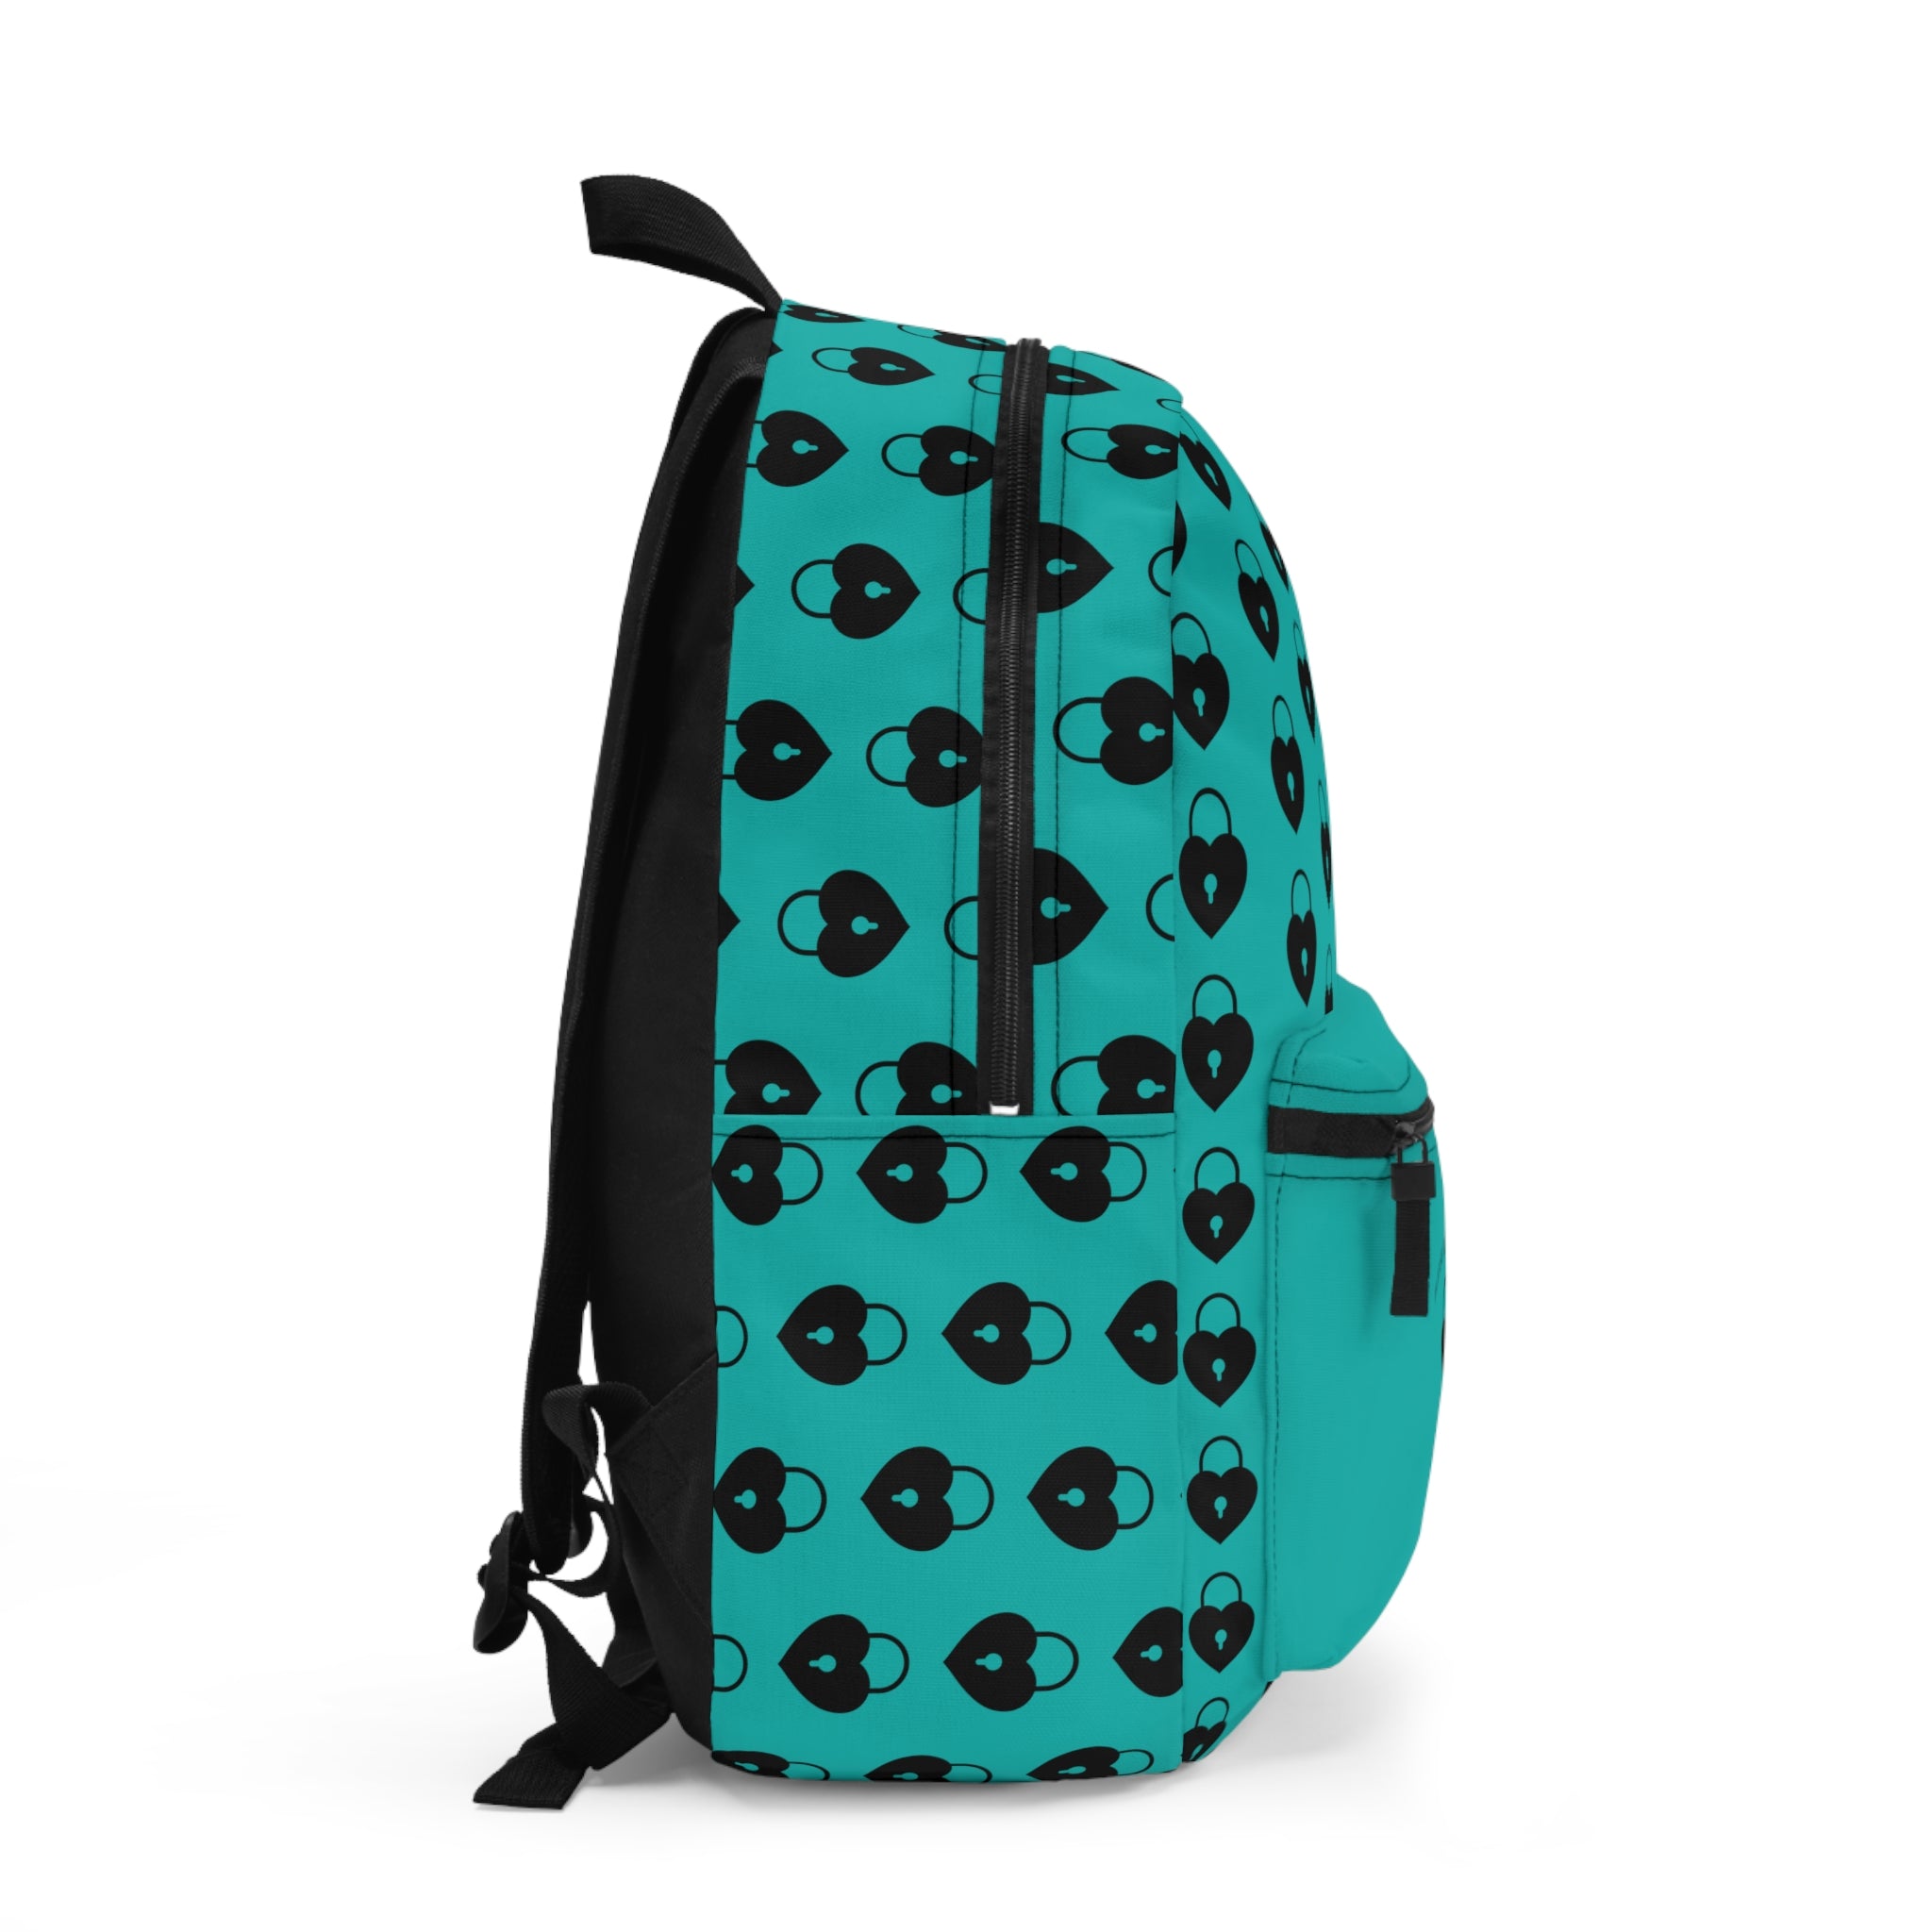 Terrific and Co. (Lock Pattern) Blue Backpack, Unisex Backpack Bags  The Middle Aged Groove